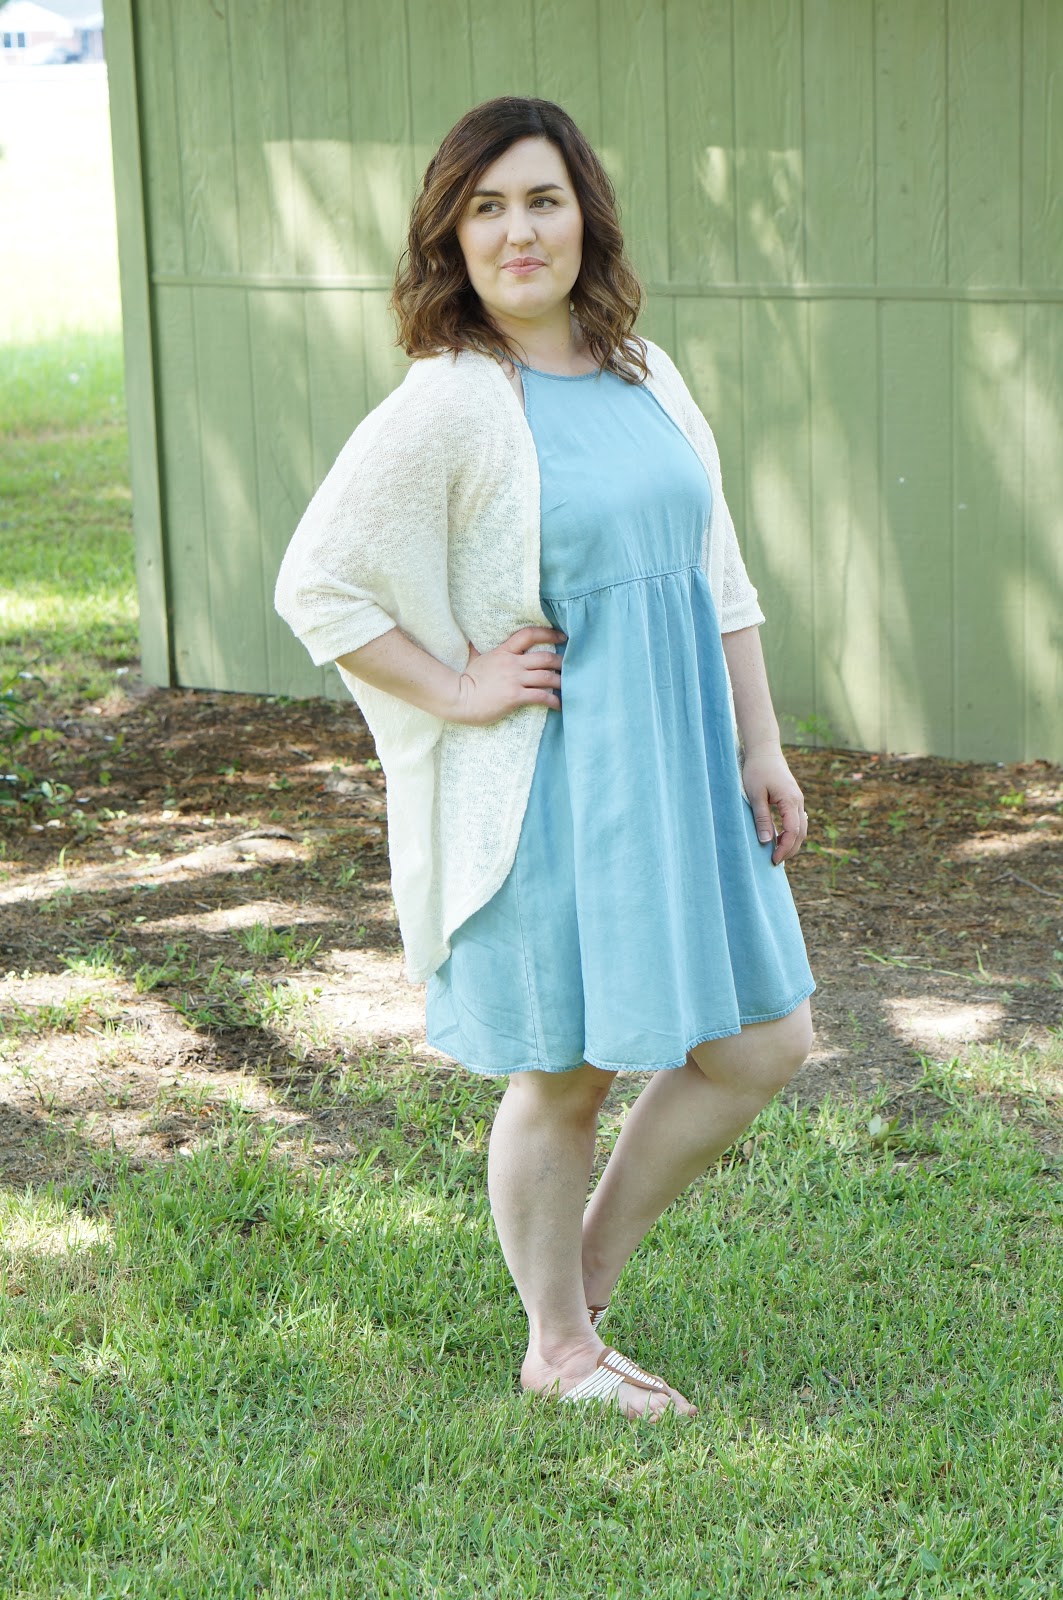 Rebecca Lately Target Chambray Swing Dress Cream Cocoon Cardigan Target DV Sandals